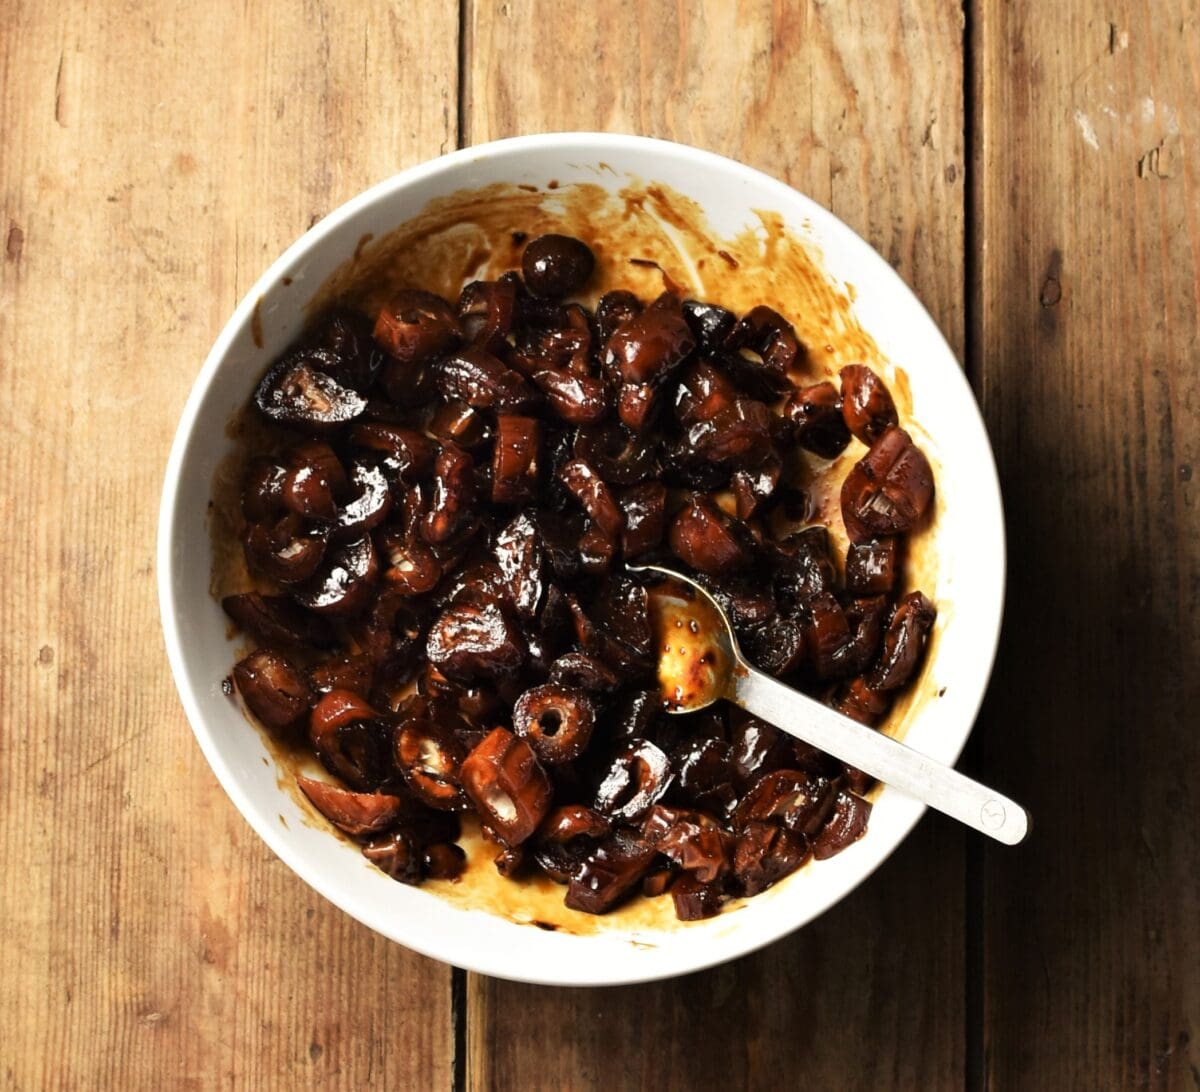 Chopped dates and coffee in white bowl with spoon.